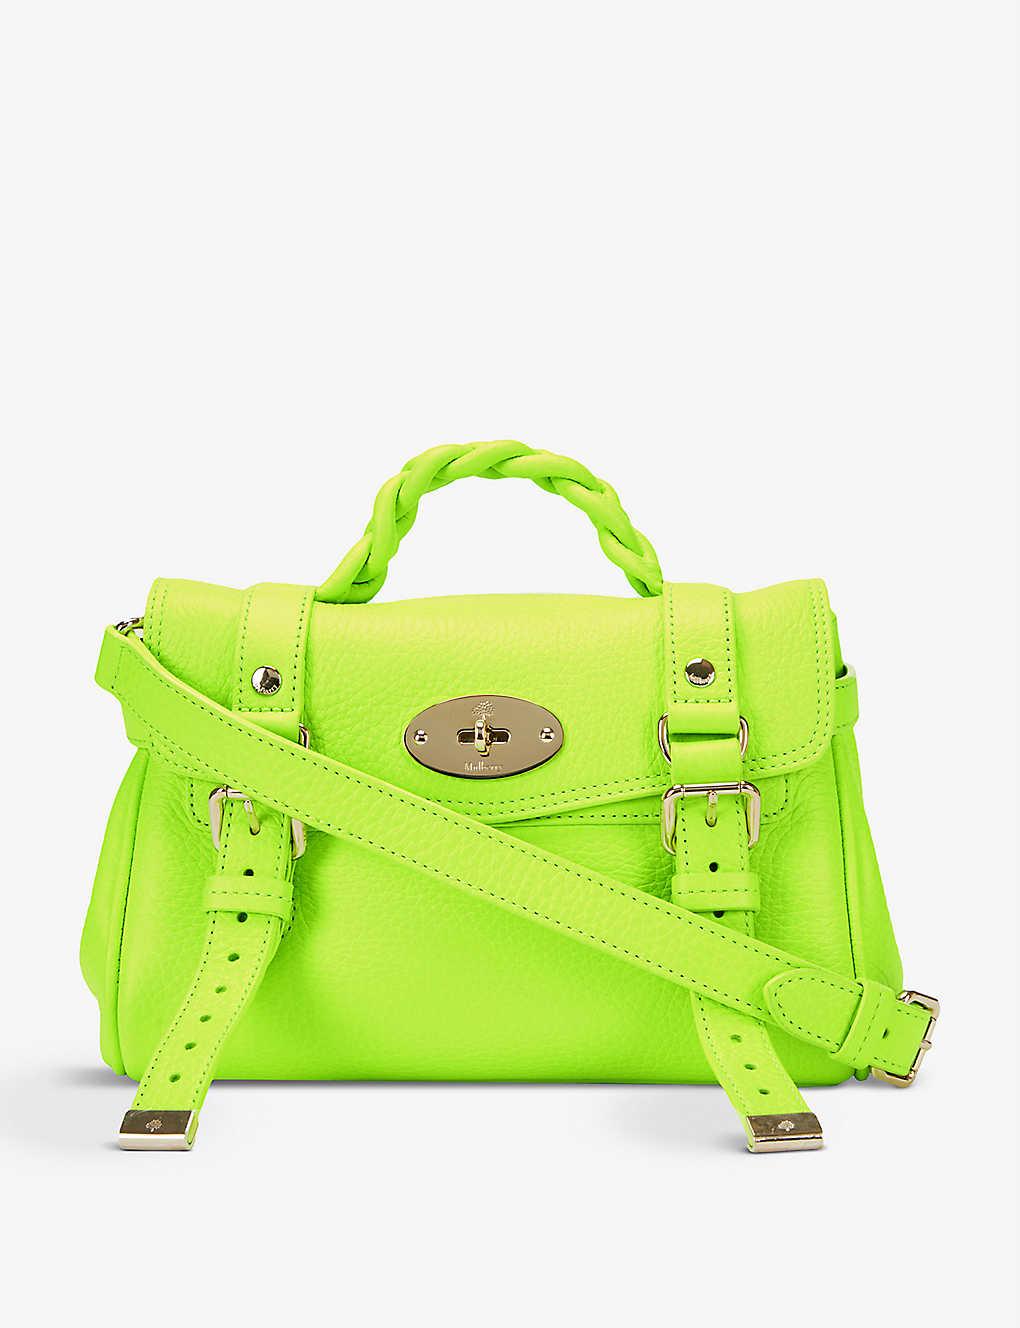 Indsigt Erhvervelse Ithaca Mulberry Mini Alexa Leather Satchel in Green | Lyst